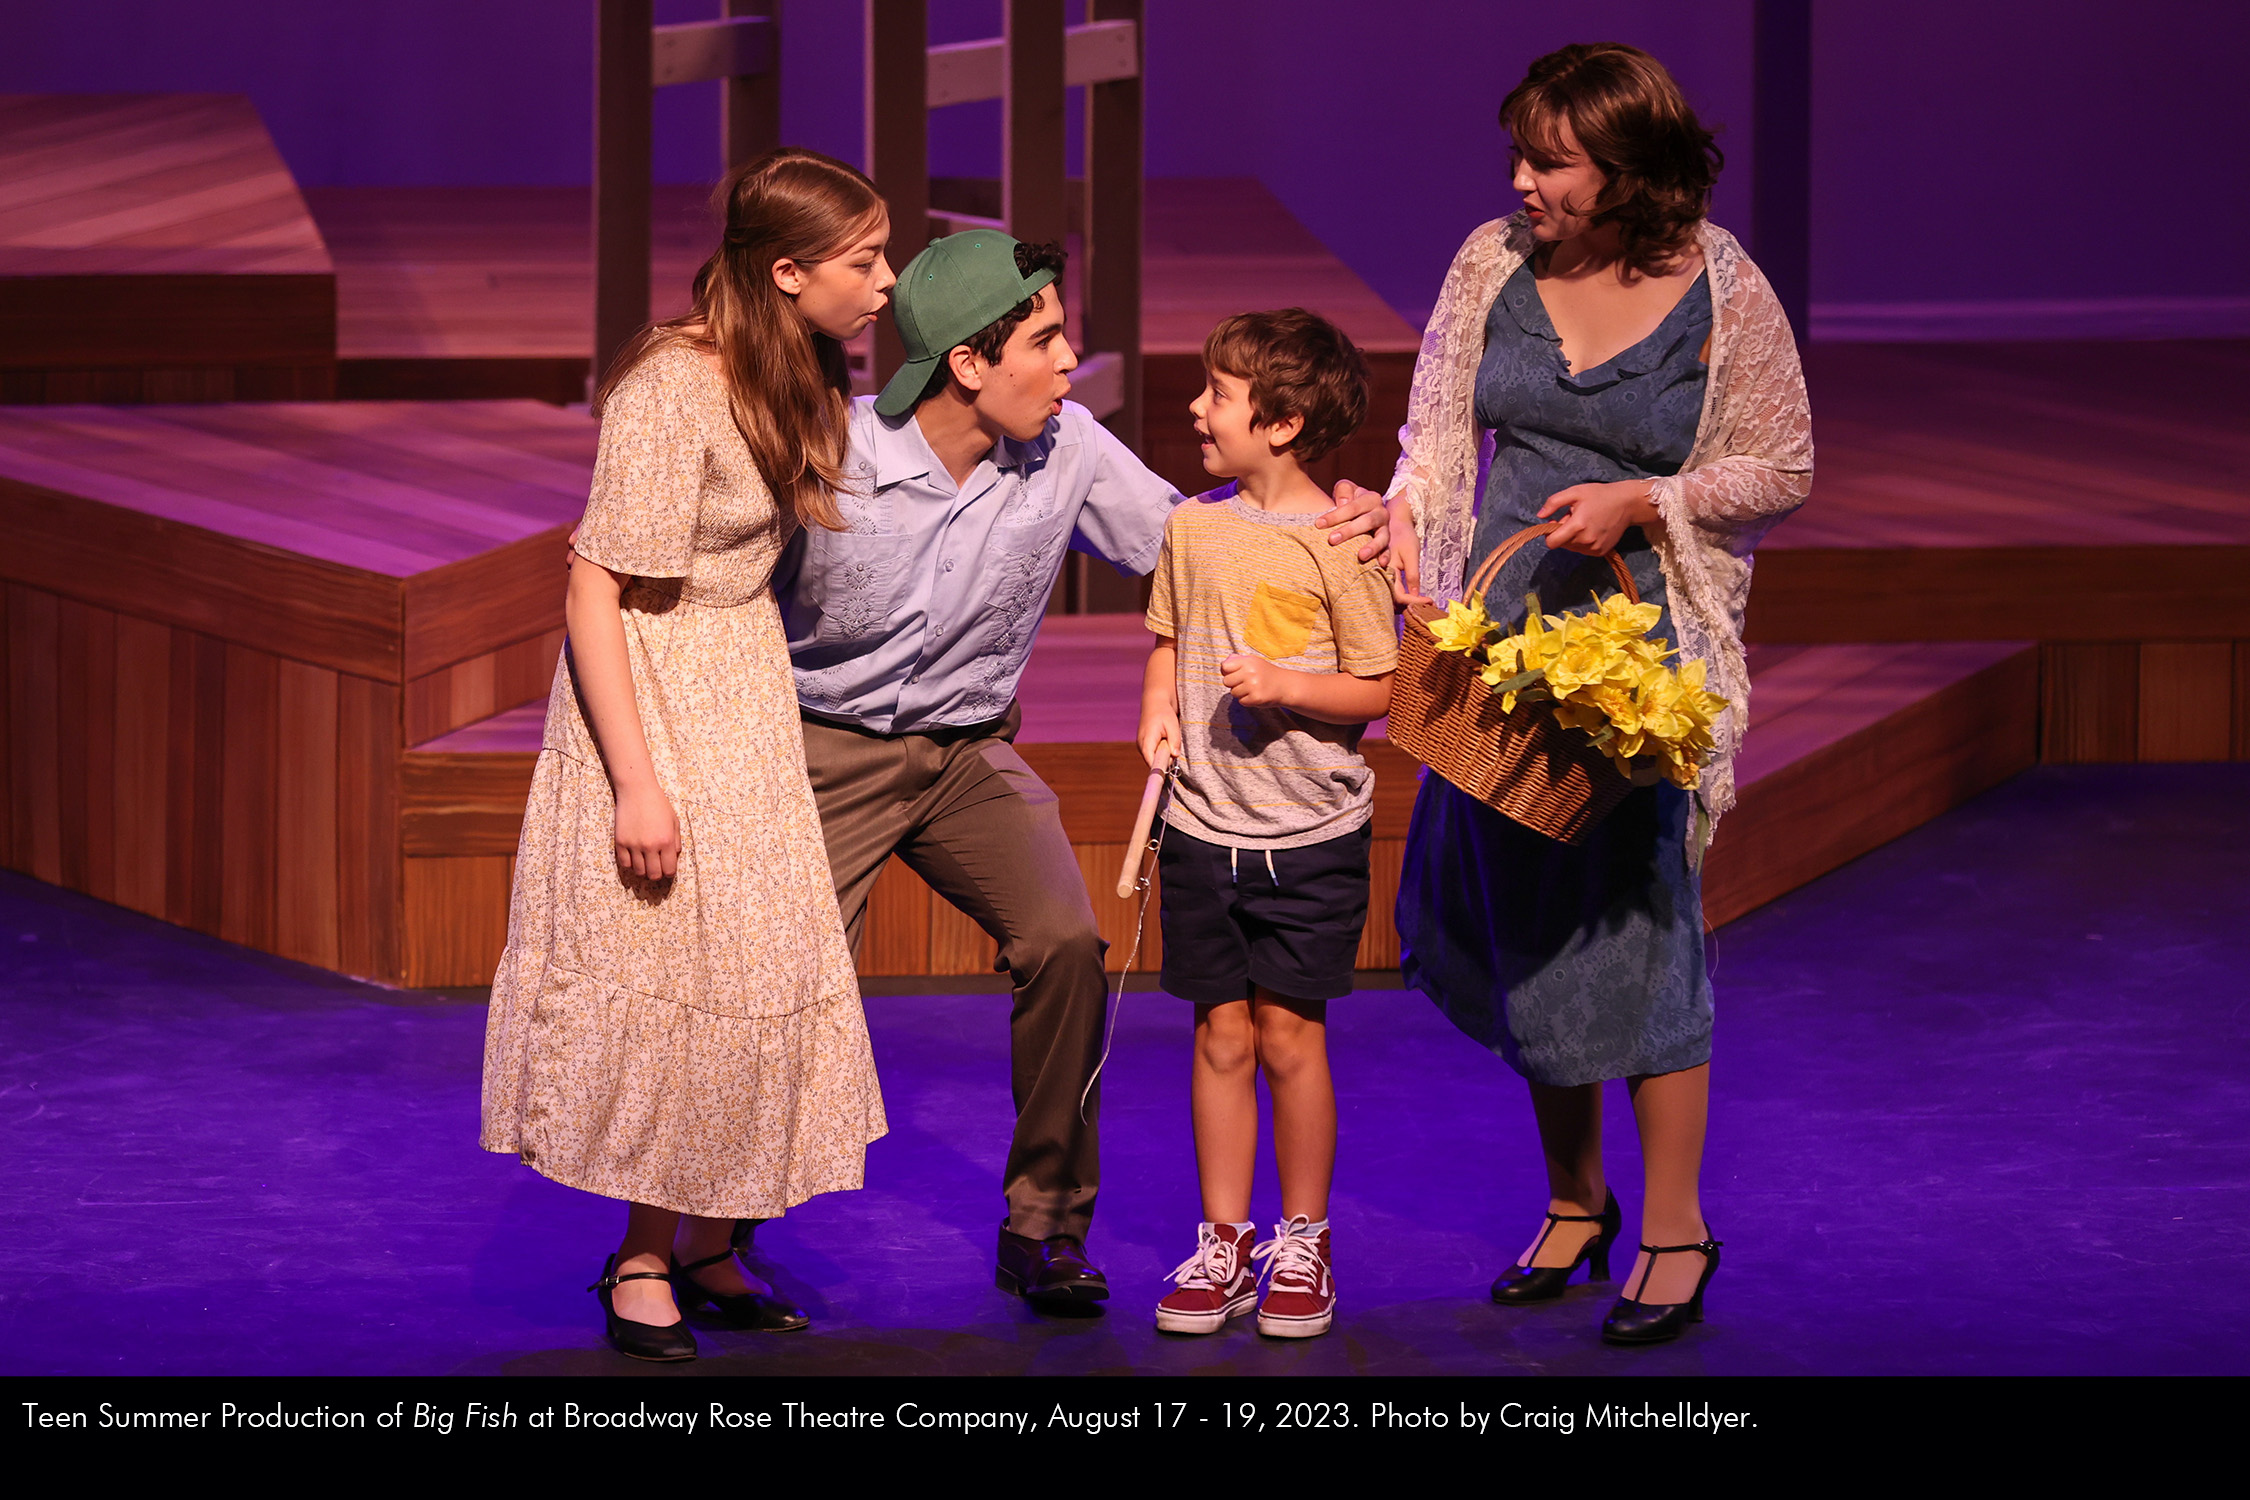 Teen Summer Production of Big Fish at Broadway Rose Theatre Company, August 17 - 19, 2023. Photo by Craig Mitchelldyer.